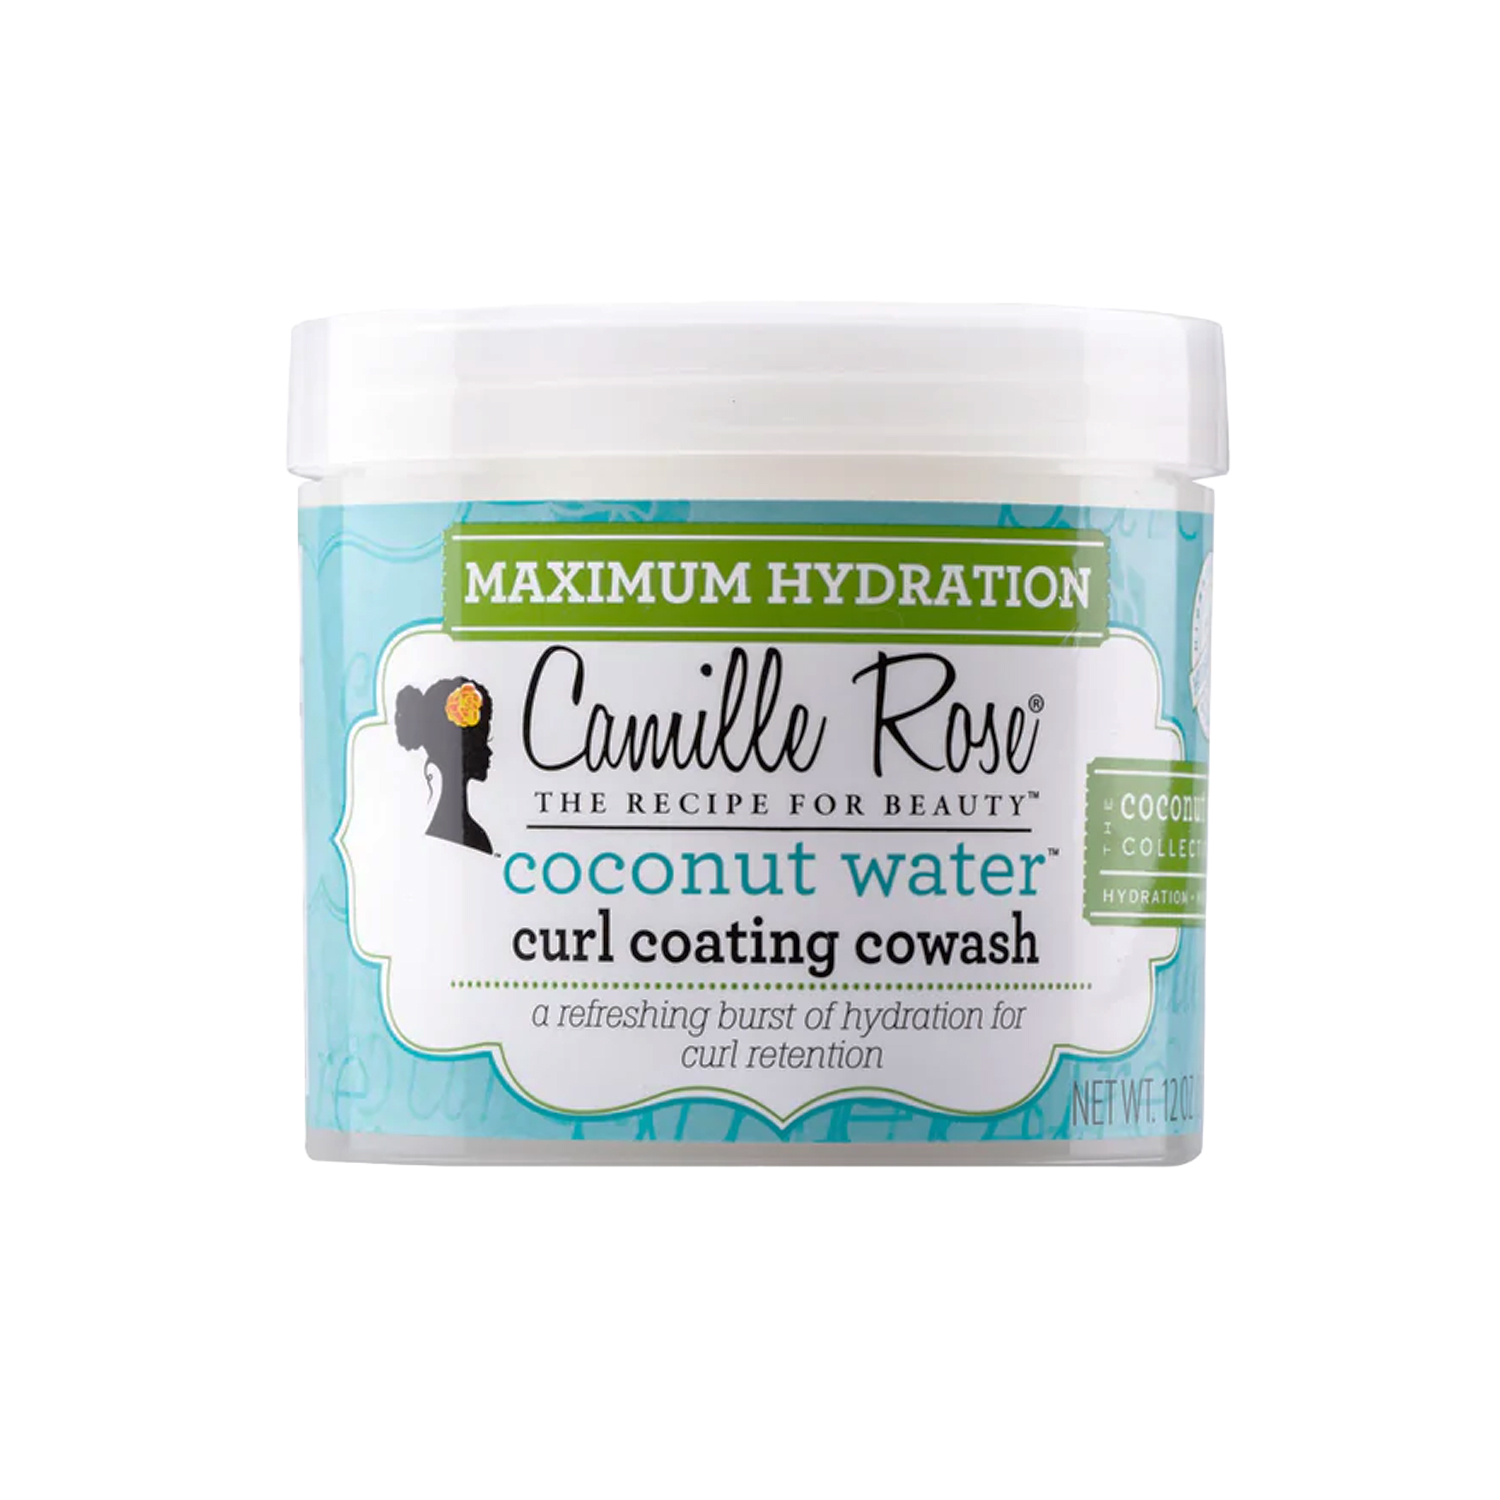 Camille Rose Coconut Water Curl Coating Co-wash 12oz